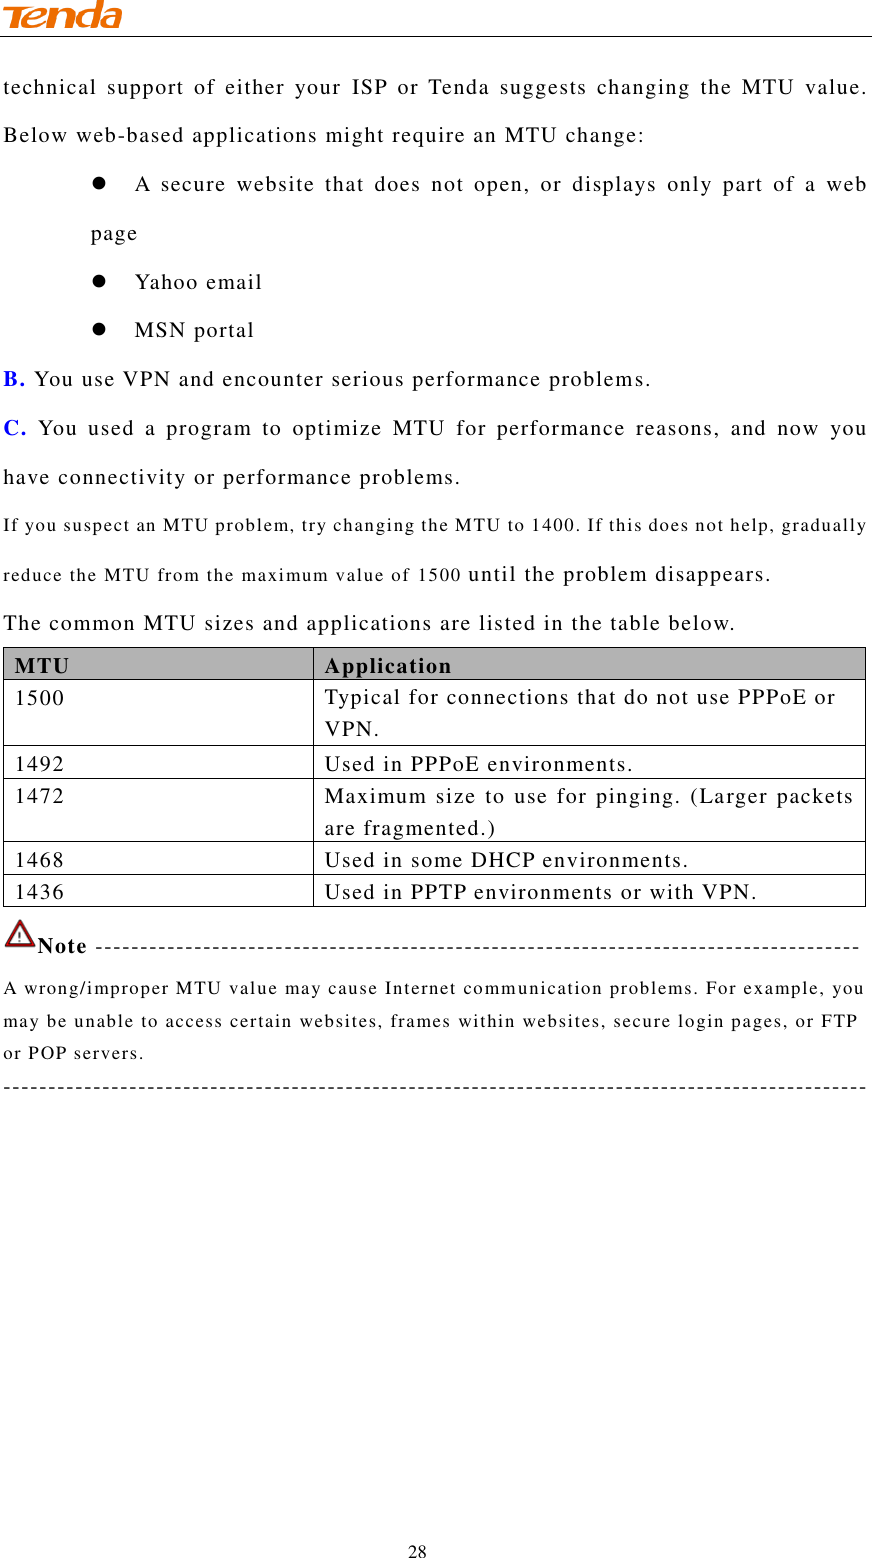                                    28 technical  support  of  either  your  ISP  or  Tenda  suggests  changing  the  MTU  value. Below web-based applications might require an MTU change:  A  secure  website  that  does  not  open,  or  displays  only  part  of  a  web page  Yahoo email  MSN portal B. You use VPN and encounter serious performance problems. C. You  used  a  program  to  optimize  MTU  for  performance  reasons,  and  now  you have connectivity or performance problems. If you suspect an MTU problem, try changing the MTU to 1400. If this does not help, gradually reduce the MTU from the maximum value of 1500 until the problem disappears. The common MTU sizes and applications are listed in the table below. MTU Application 1500 Typical for connections that do not use PPPoE or VPN. 1492 Used in PPPoE environments. 1472 Maximum size  to  use for pinging. (Larger packets are fragmented.) 1468 Used in some DHCP environments. 1436 Used in PPTP environments or with VPN. Note ------------------------------------------------------------------------------------- A wrong/improper MTU value may cause Internet communication problems. For example, you may be unable to access certain websites, frames within websites, secure login pages, or FTP or POP servers. ------------------------------------------------------------------------------------------------ 